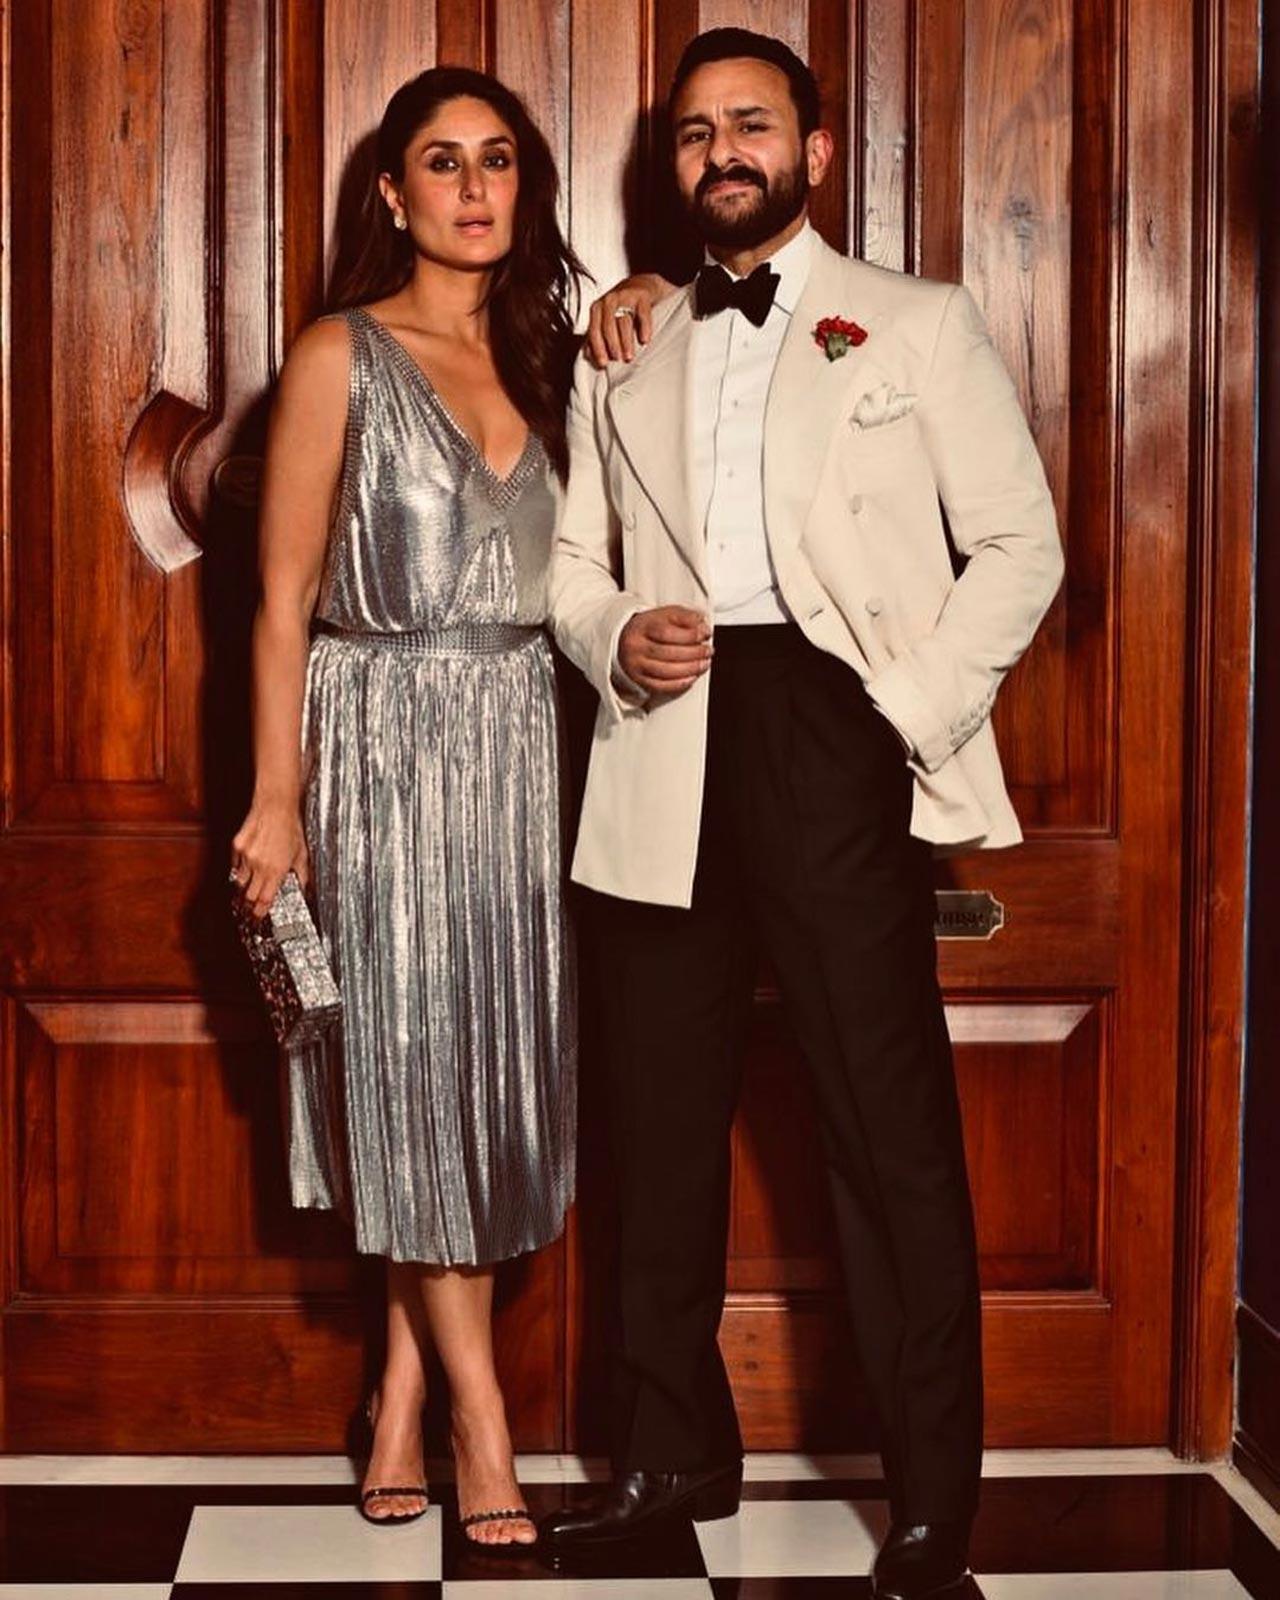 Saif Ali Khan and Kareena Kapoor Khan
The ultimate royal couple Saif and Kareena have been vocal about their relationship right from their dating days. Right from being committed and a simple court wedding to now adorable family pictures with their 2 sons Taimur and Jeh, the duo set some major relationship goals to a lot of couples out there!